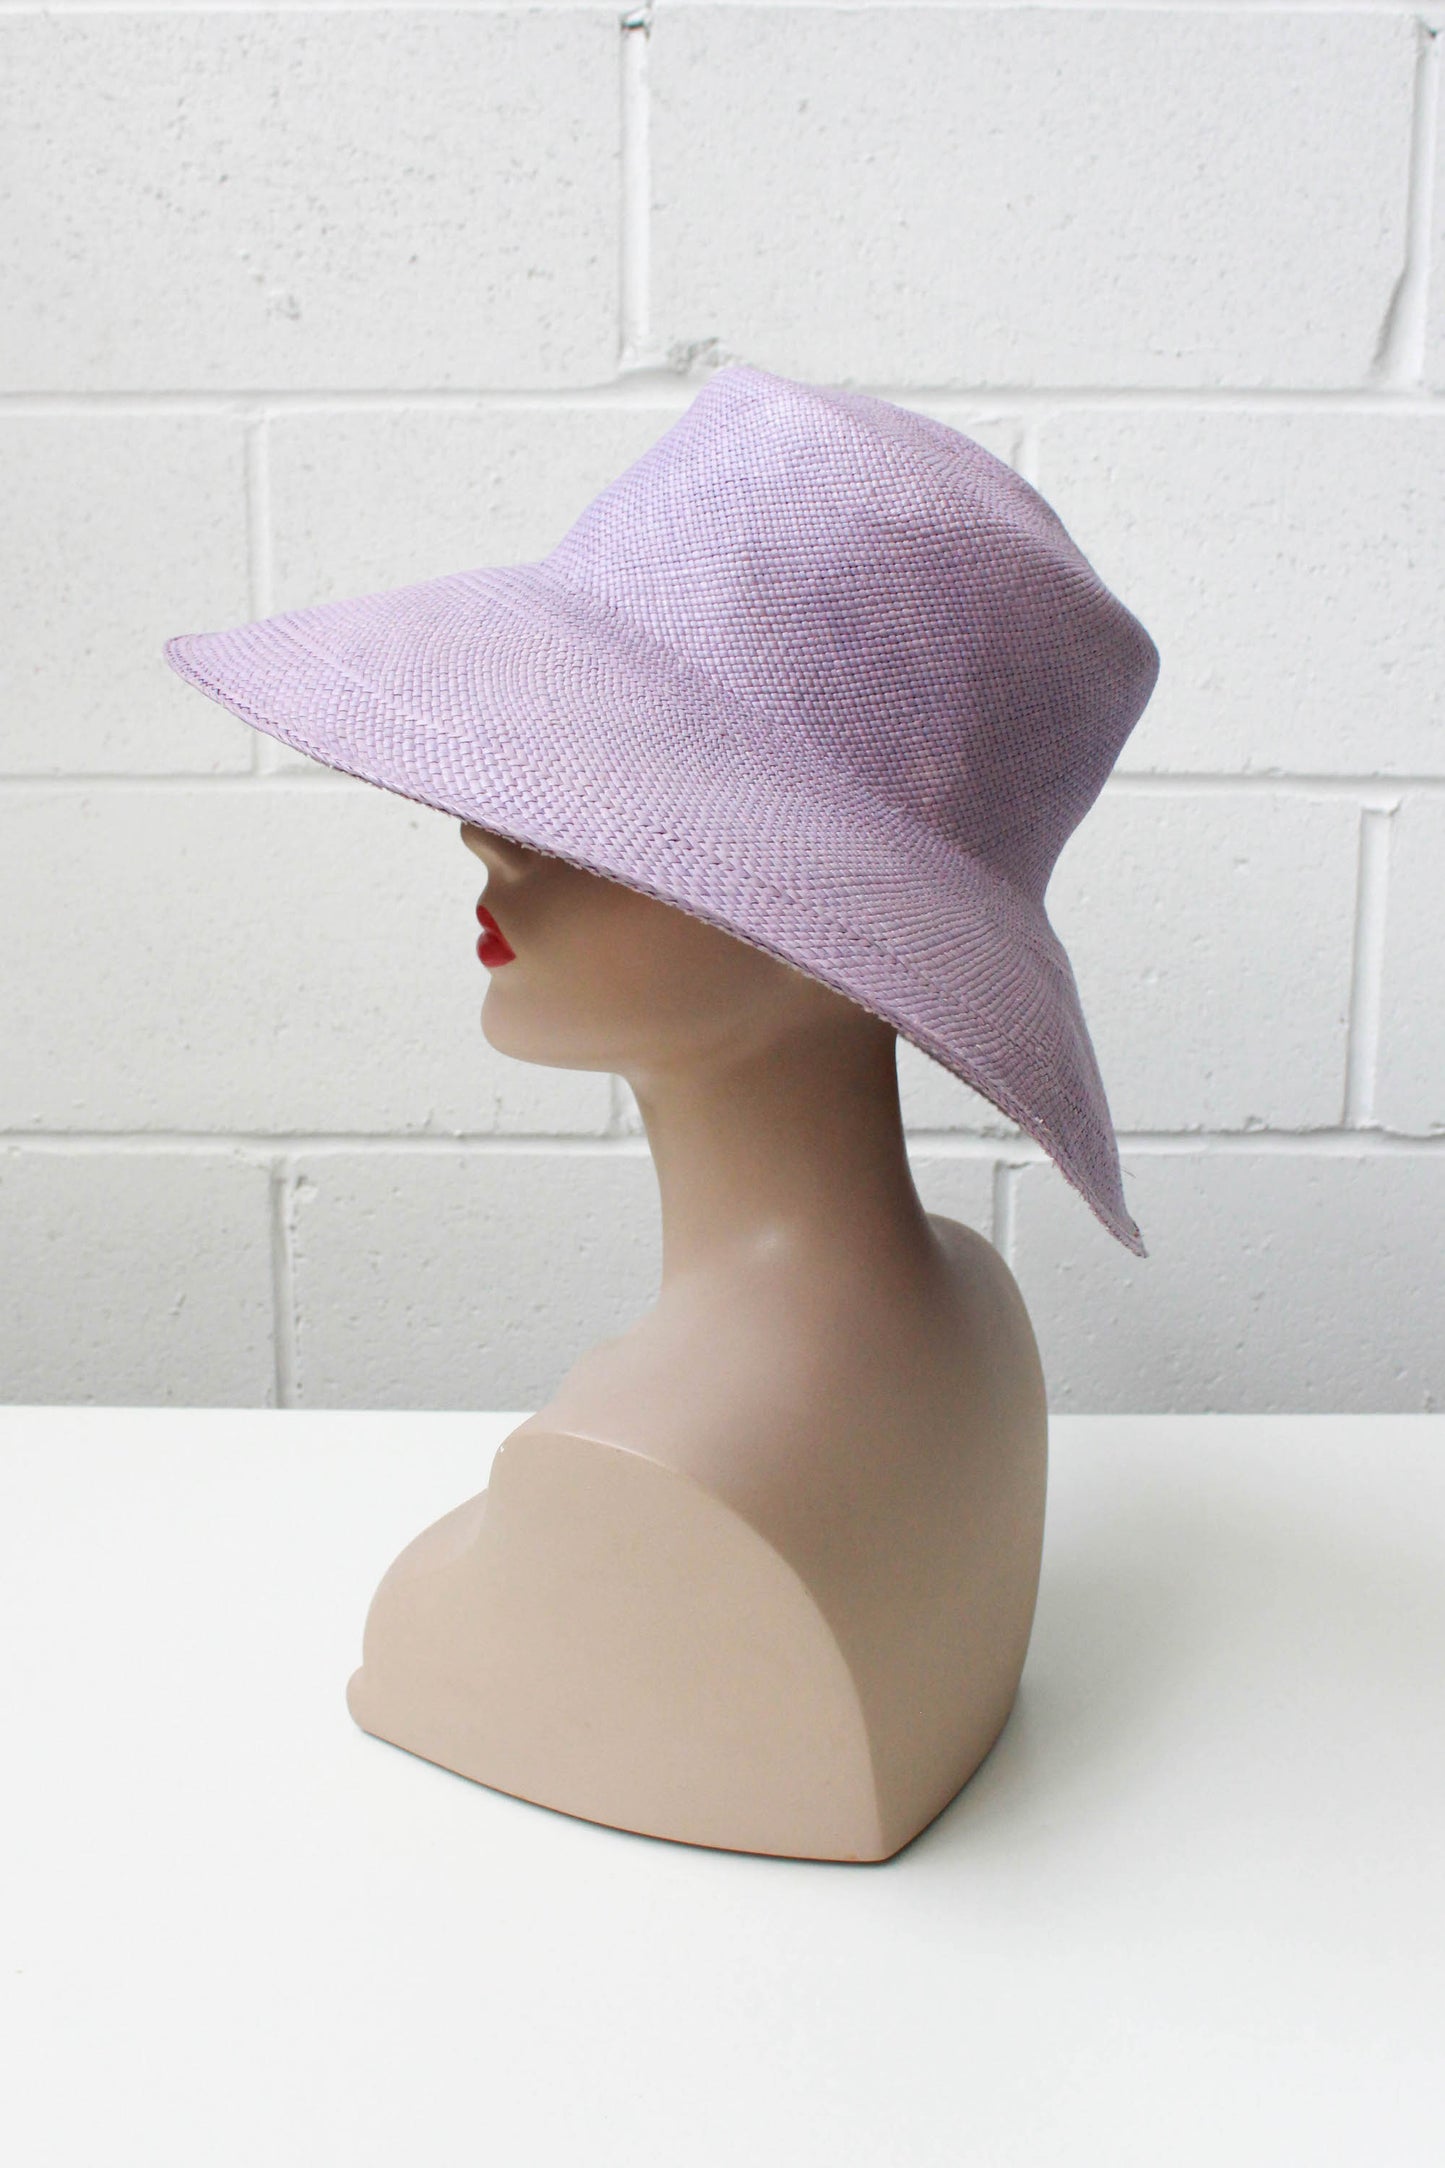 vintage loro piana lilac puglia straw sunhat wide brimmed made in italy